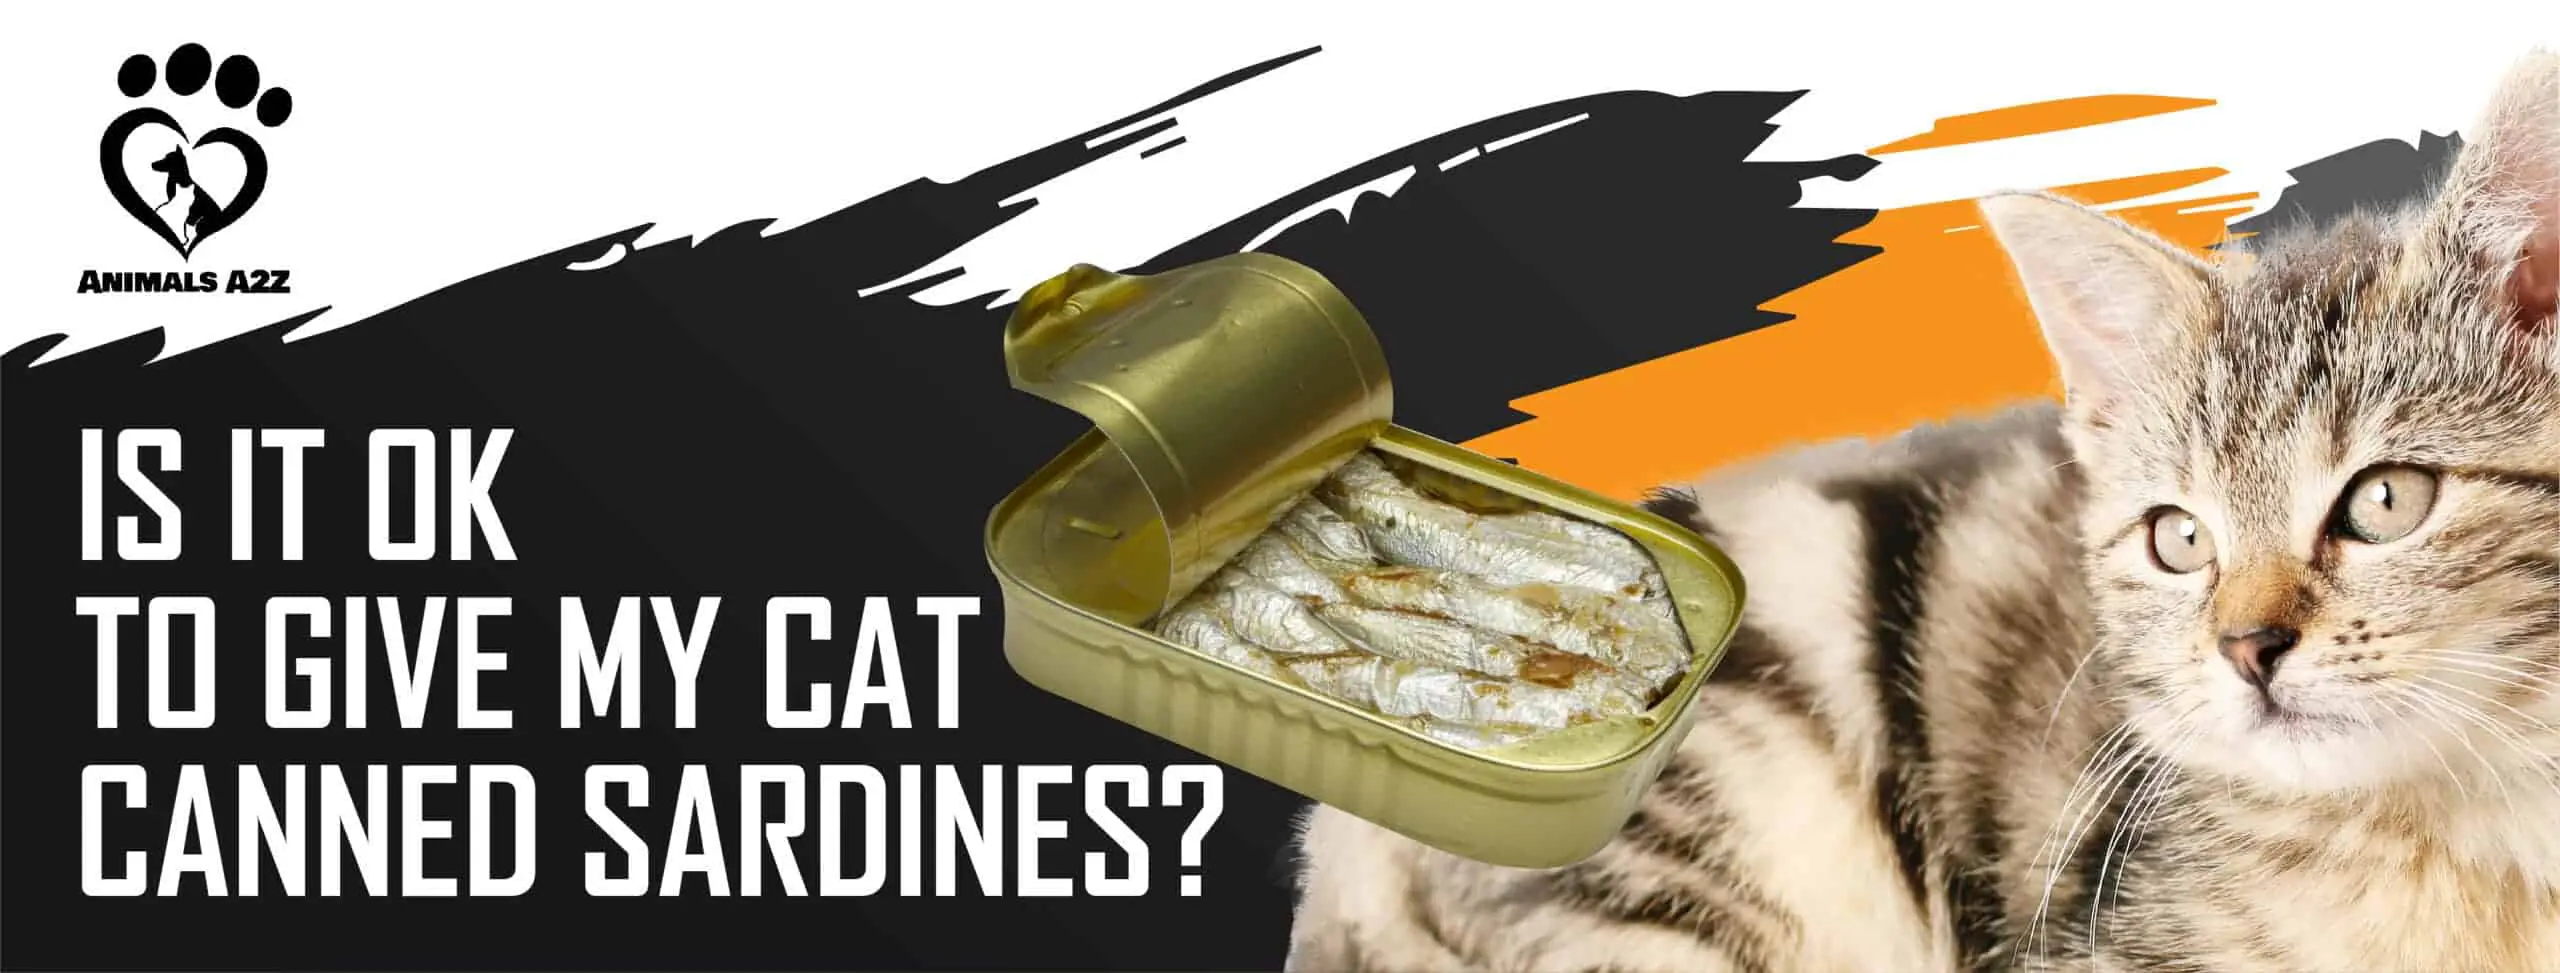 Is it OK to give my cat canned sardines